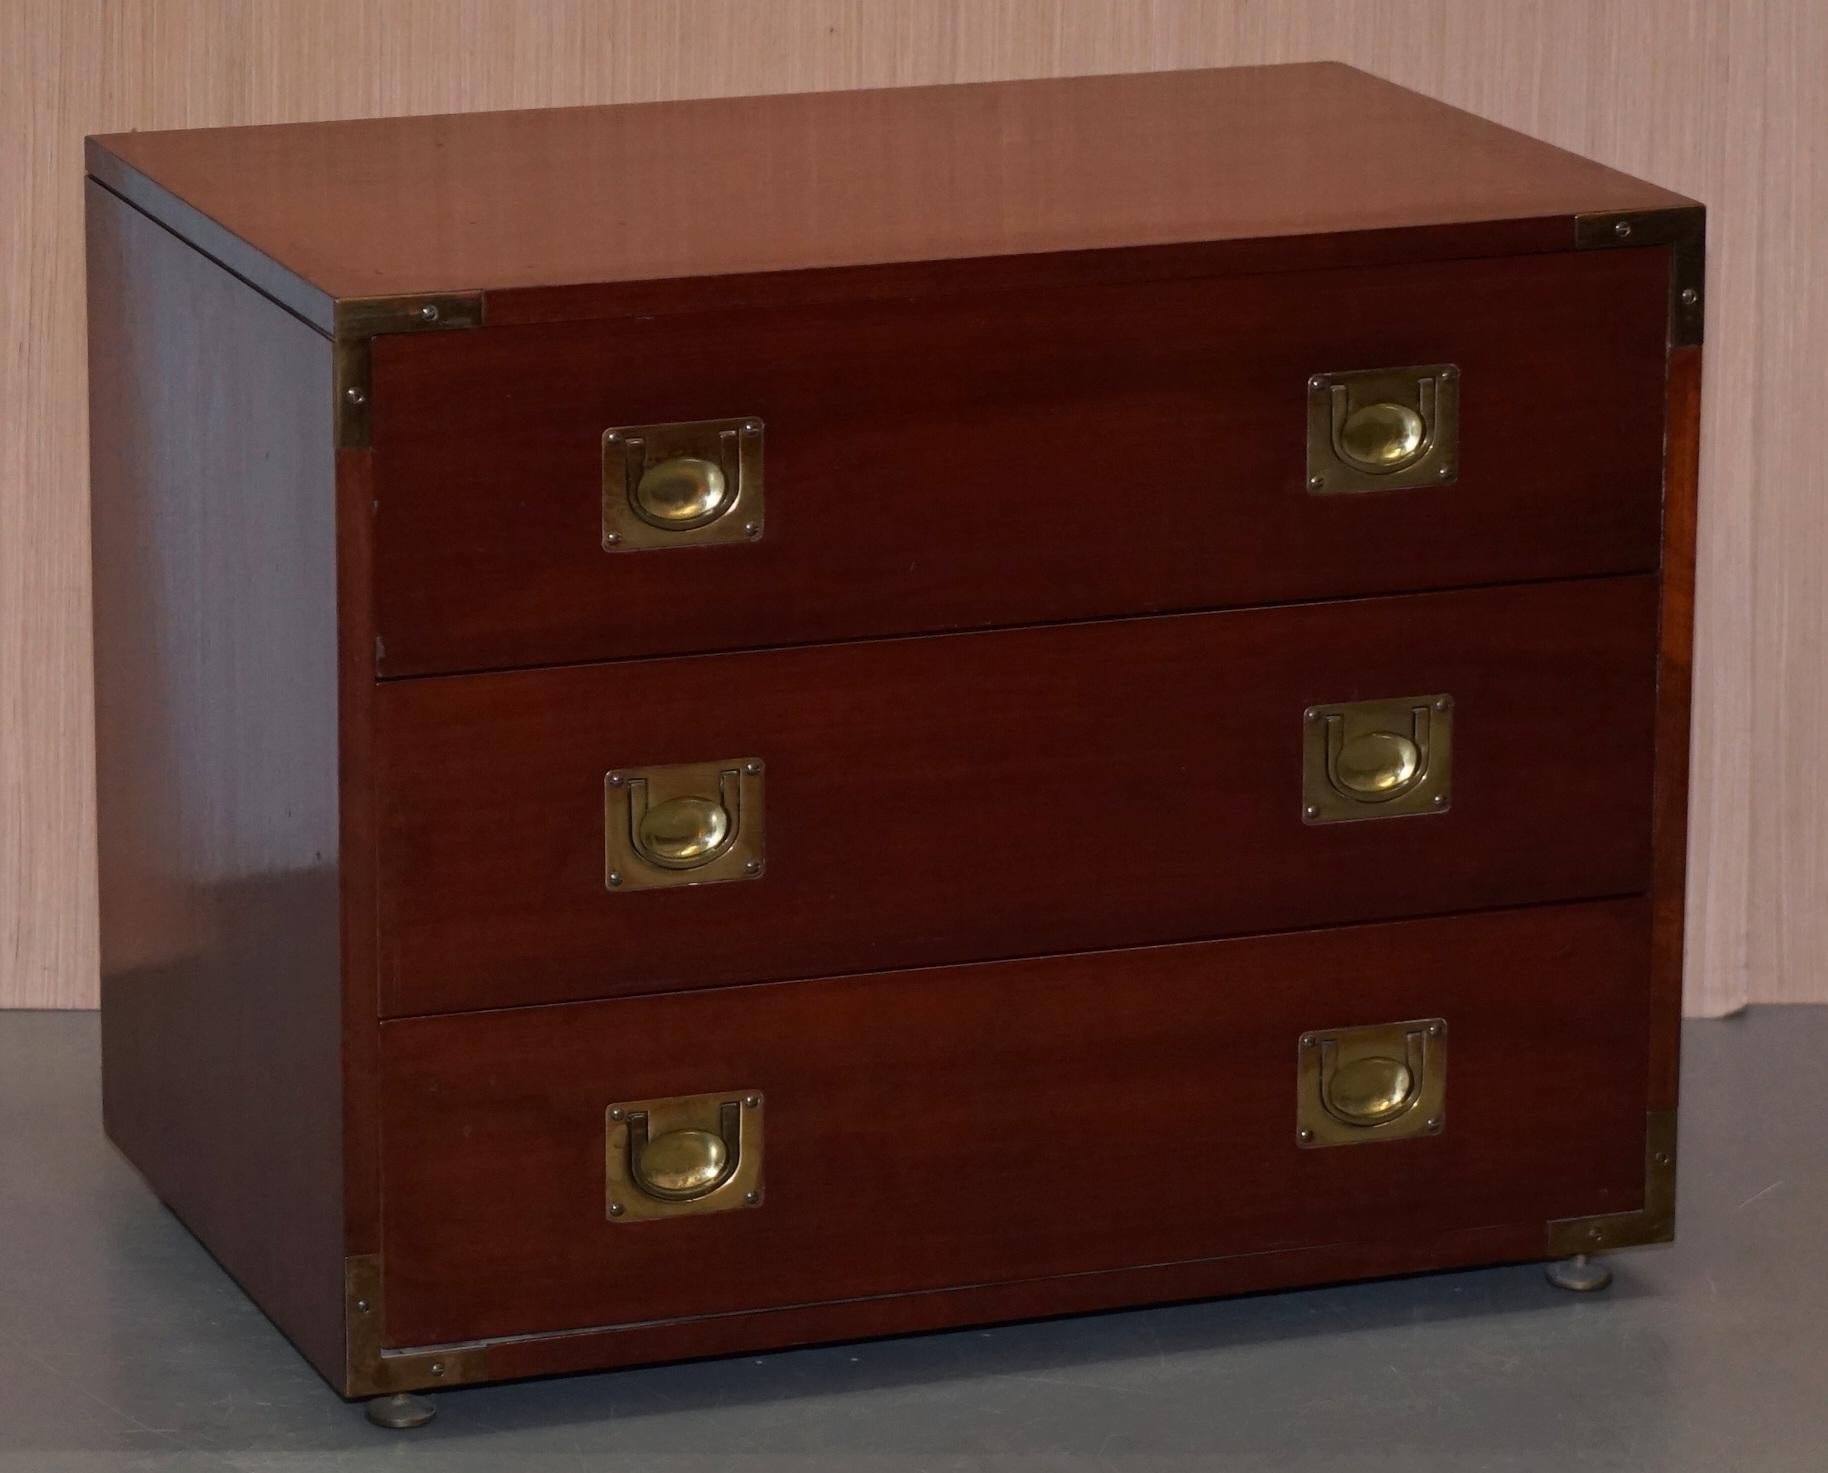 We are delighted to offer for sale this stunning pair of mahogany and brass military campaign style chests of drawers

A lovely pair, as you can see they are different sizes, they are made of a mixture of Mahogany and soft wood, the panels are